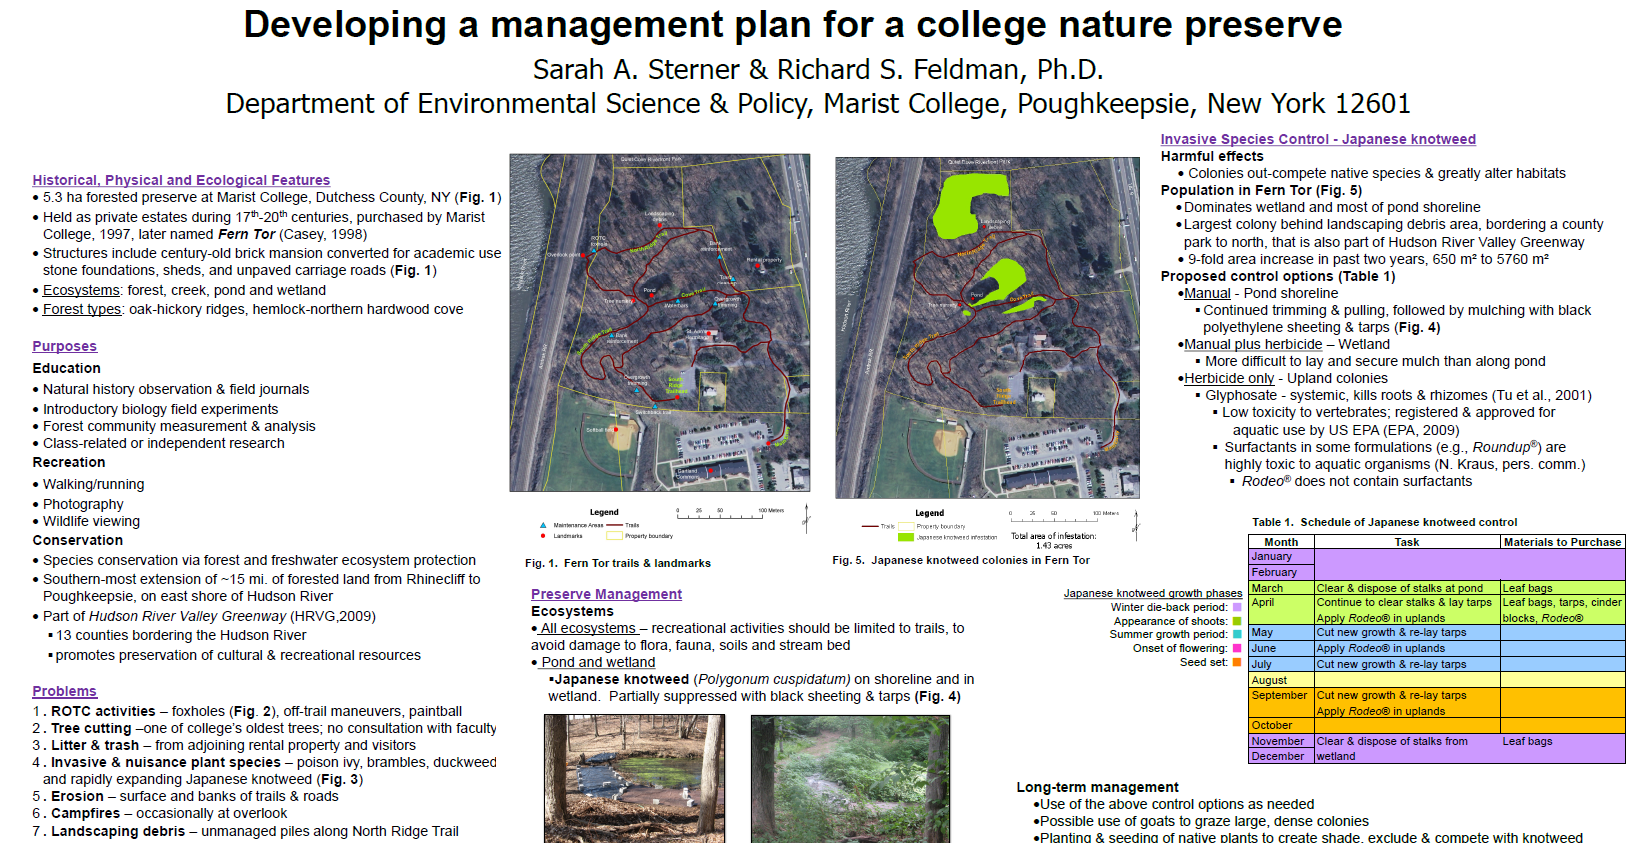 Developing a management plan for a college nature preserve